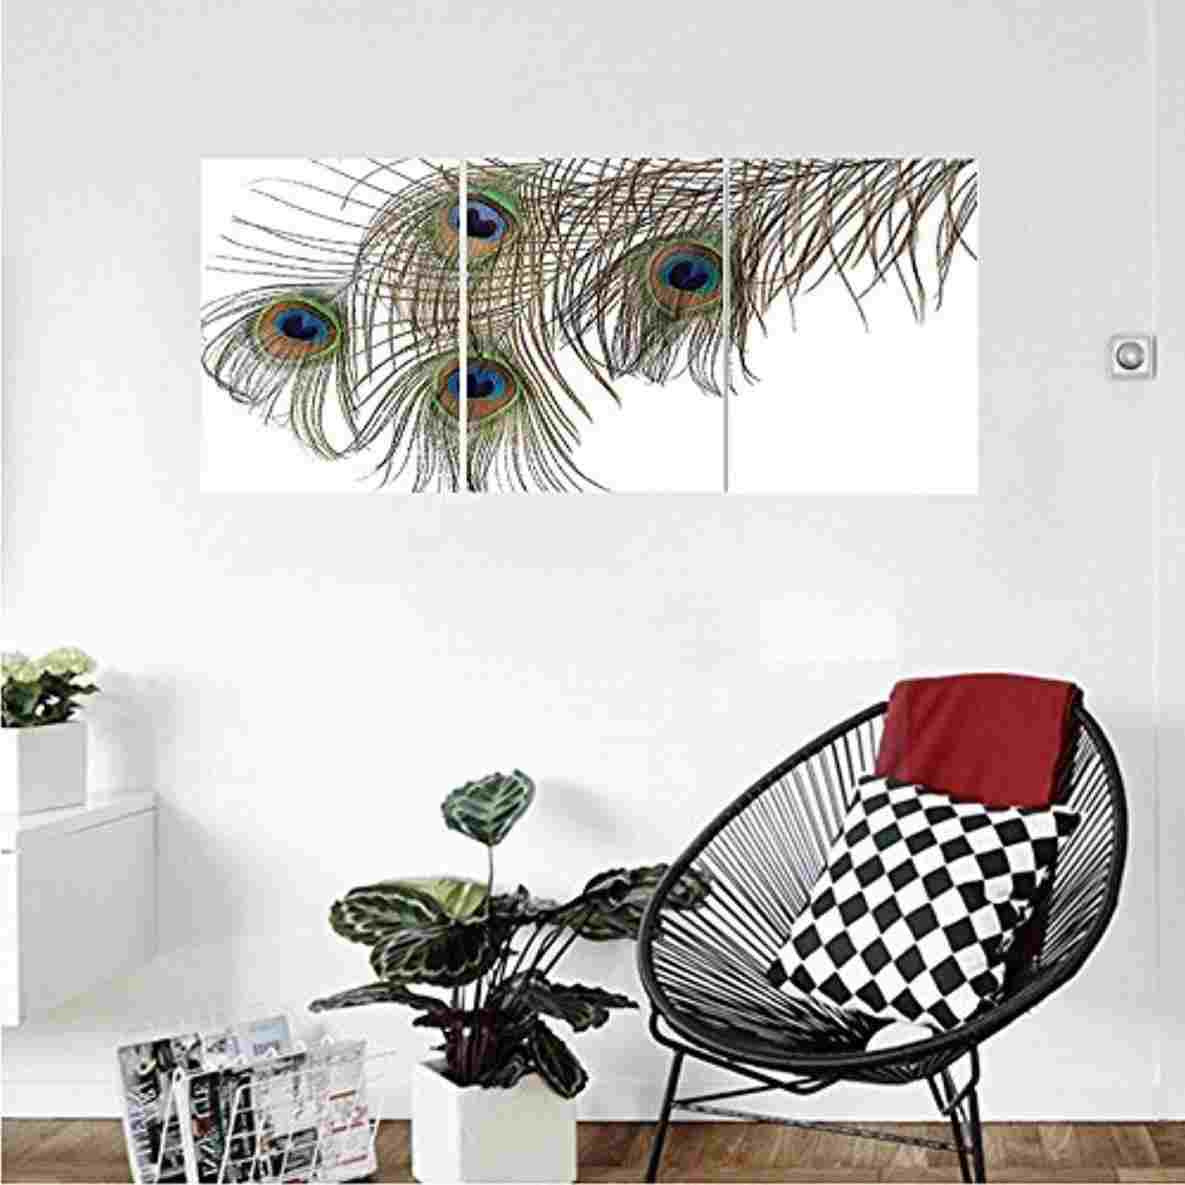 17 Recommended Peacock Feathers In Vase Ideas 2024 free download peacock feathers in vase ideas of white peacock decor diazxcode pertaining to collection a feather of rhpinterestcom liguo white peacock decor custom canvas peacock decor collection a feathe